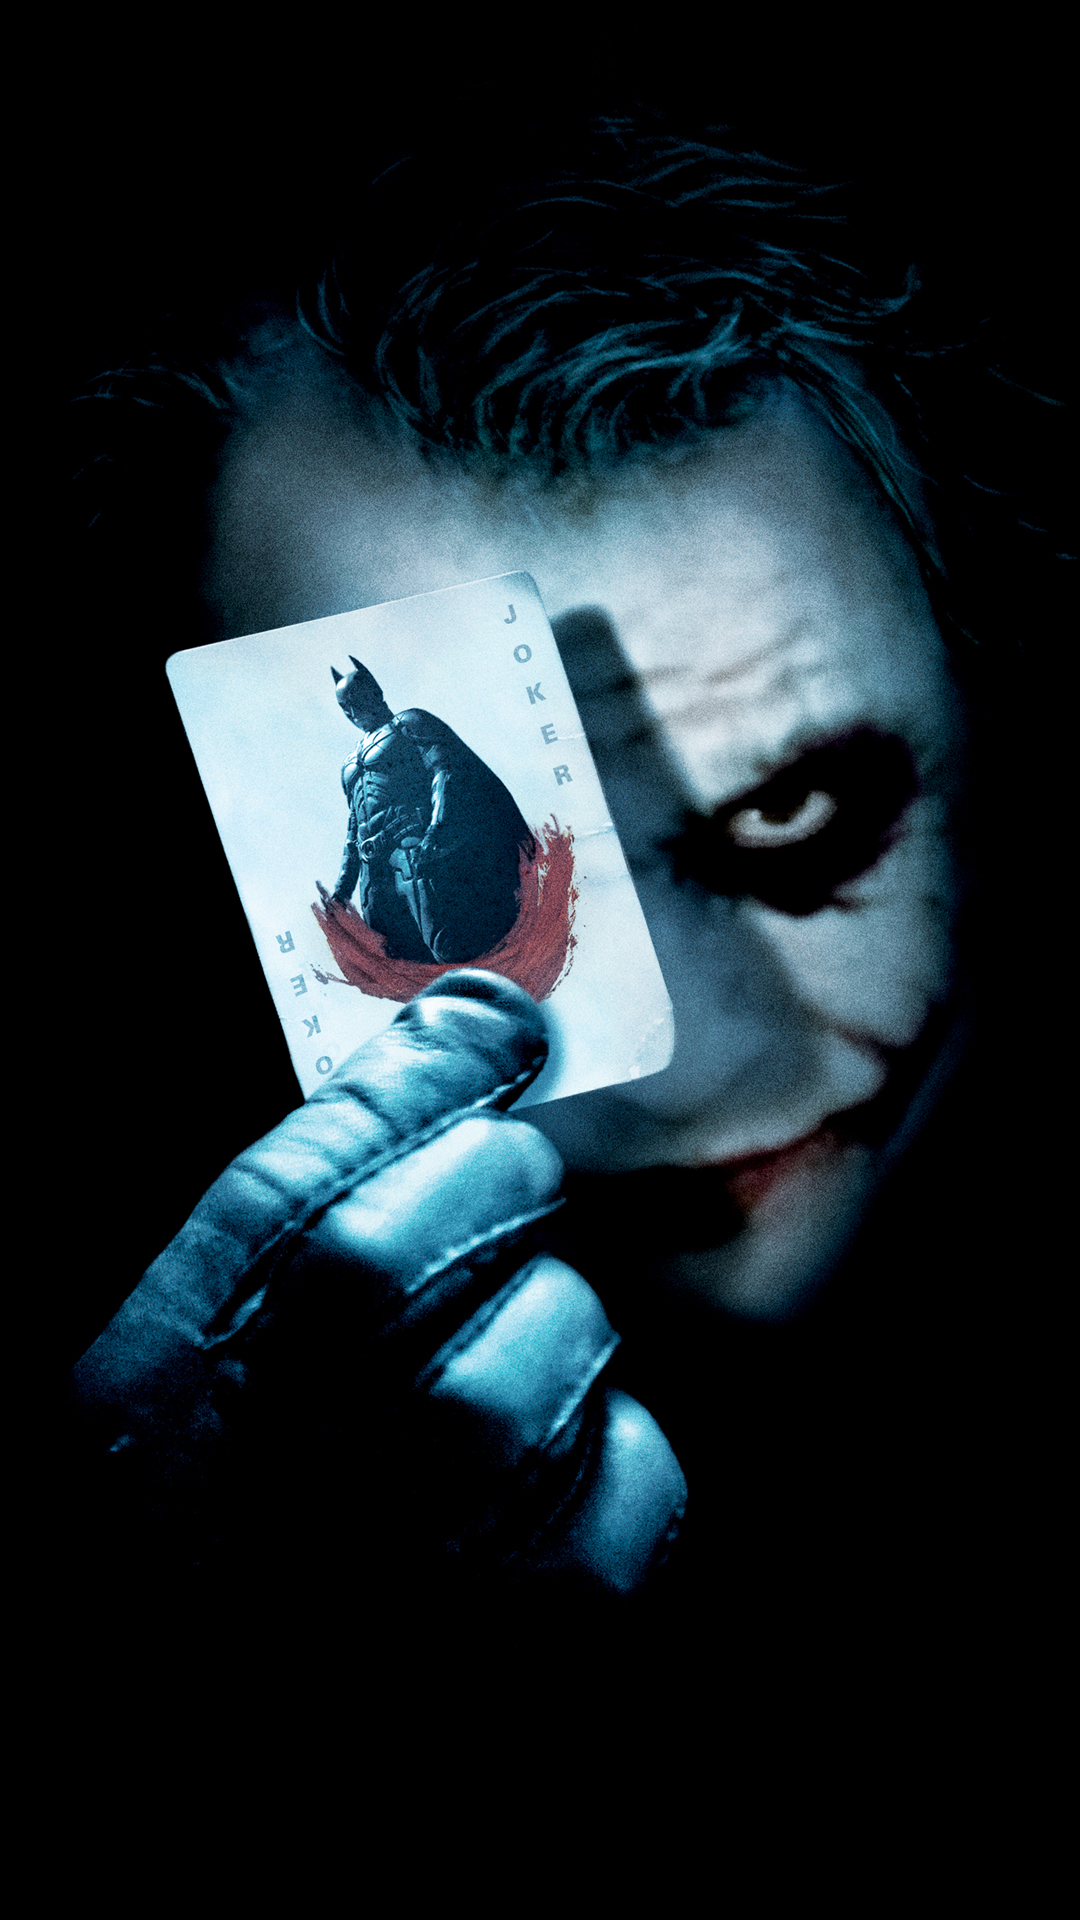 Joker - Best htc one wallpapers, free and easy to download